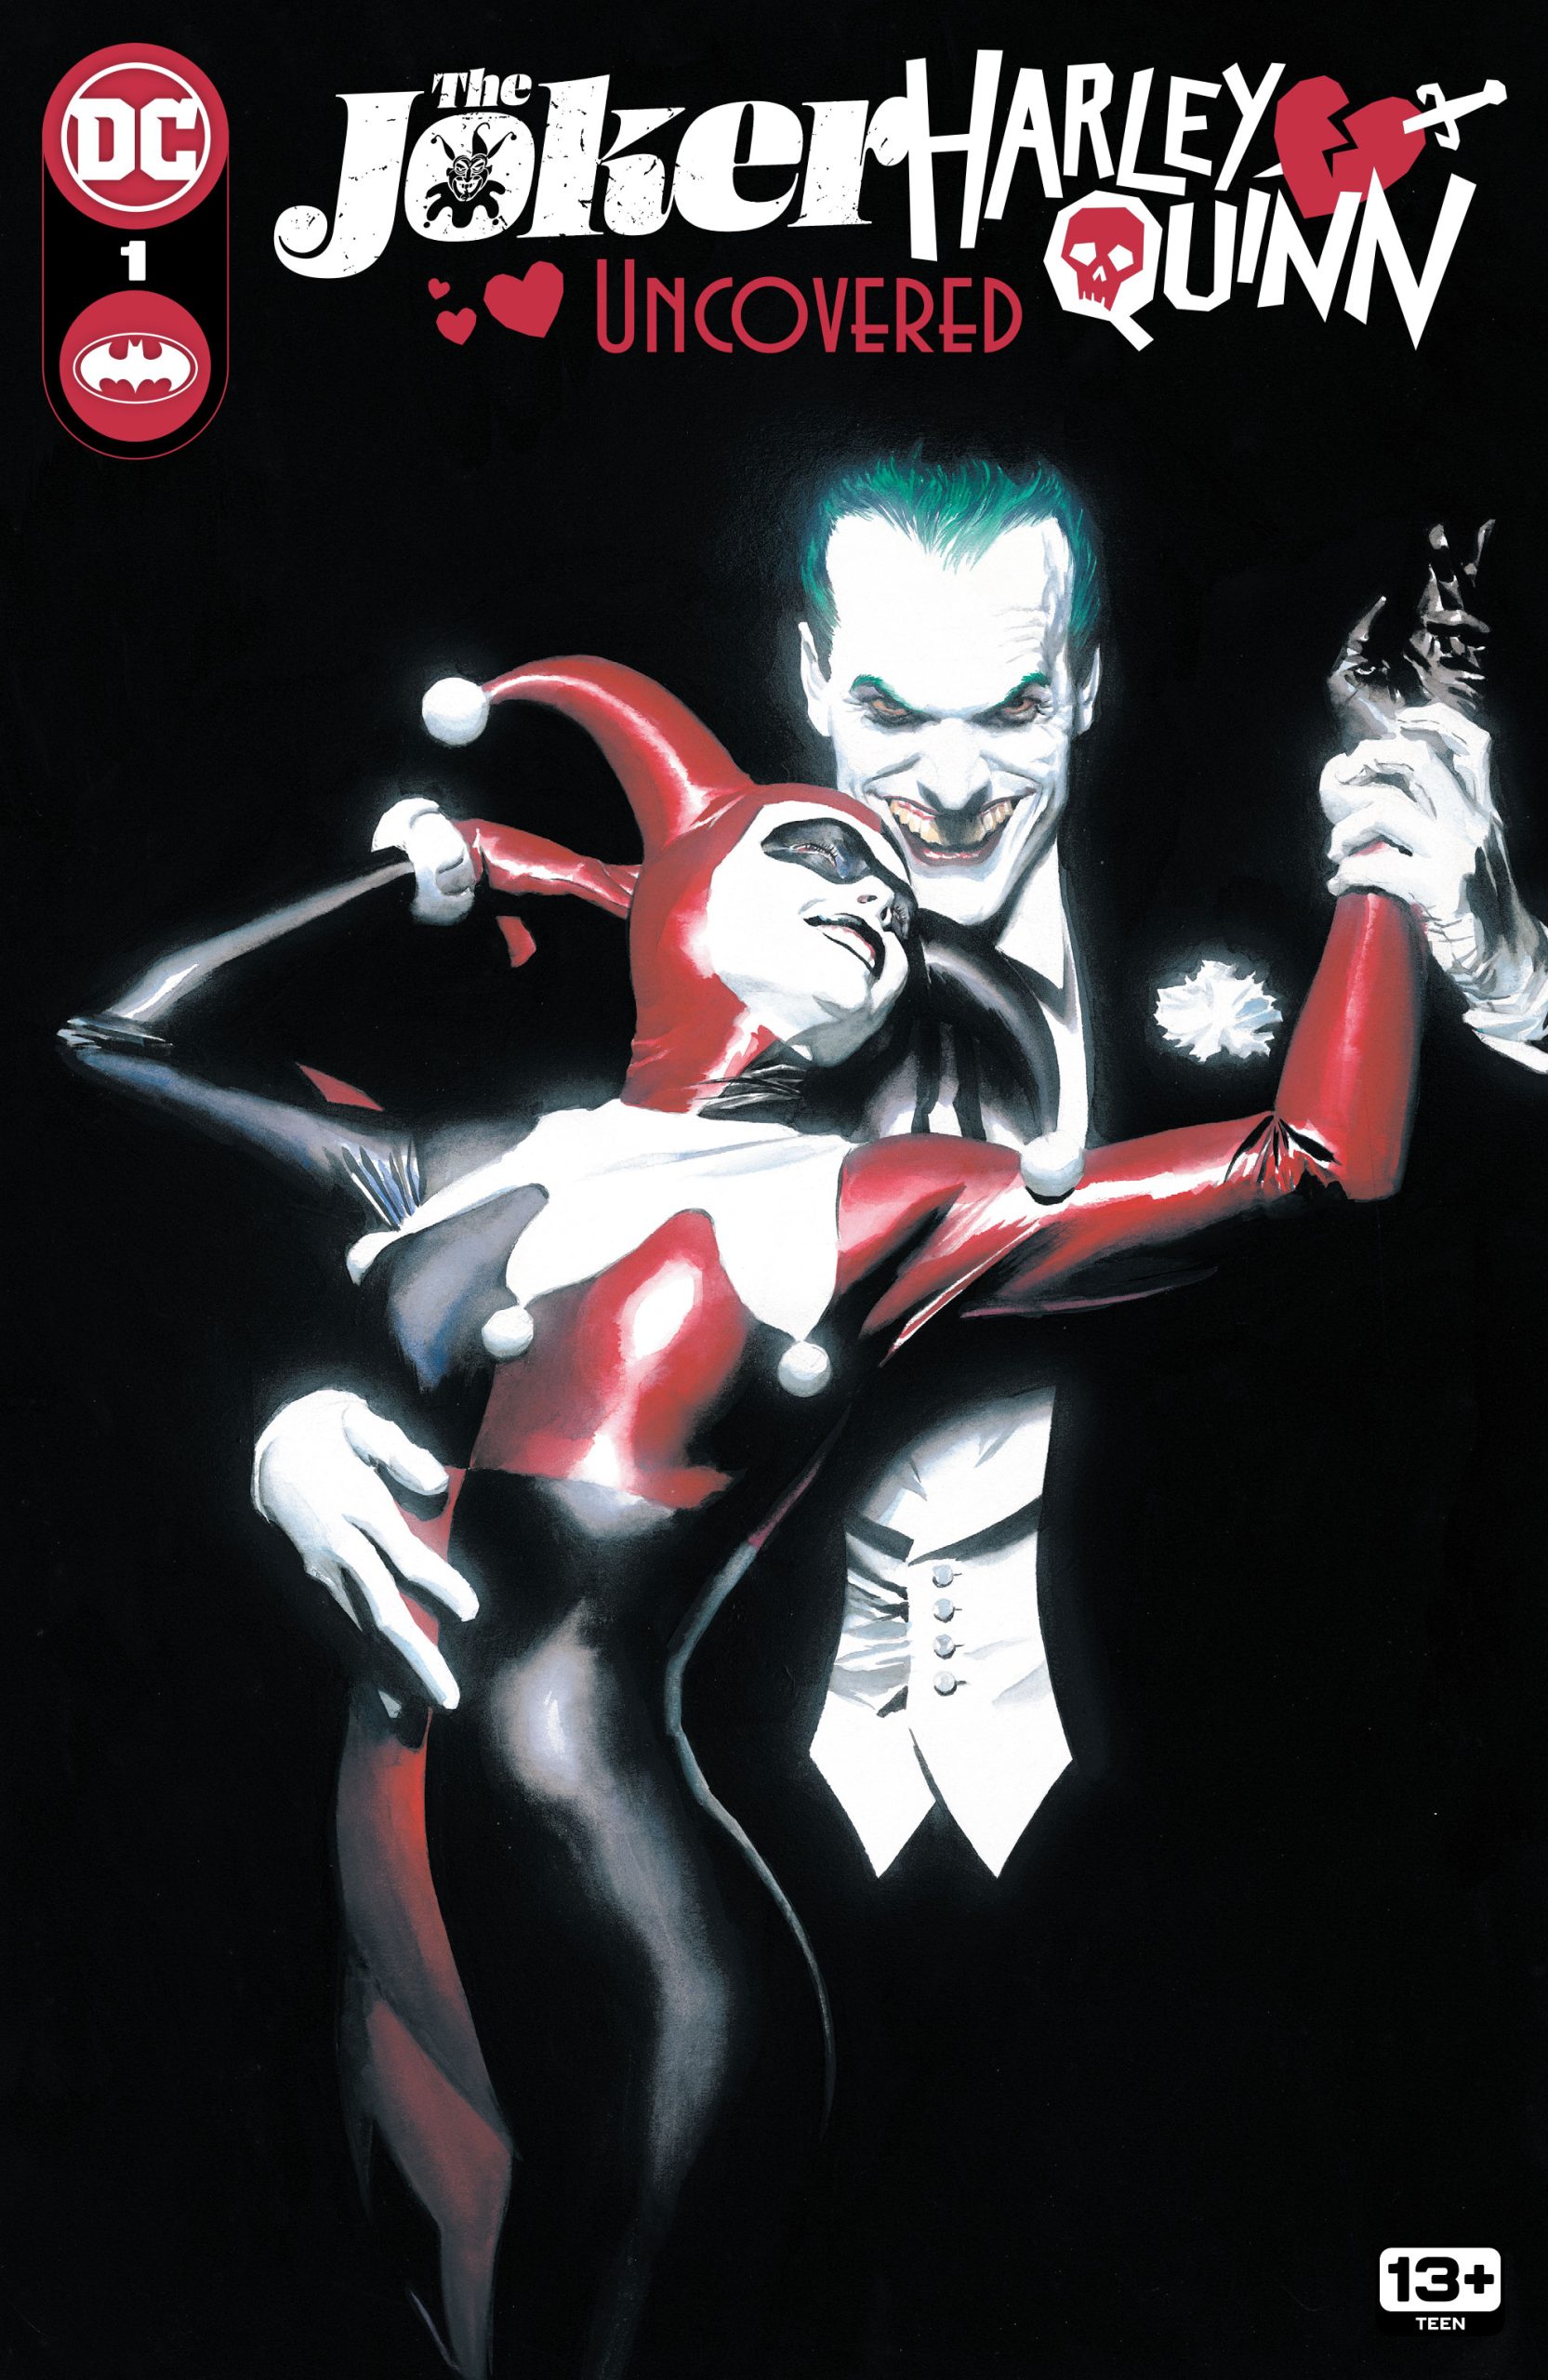 DC Preview: The Joker / Harley Quinn: Uncovered #1